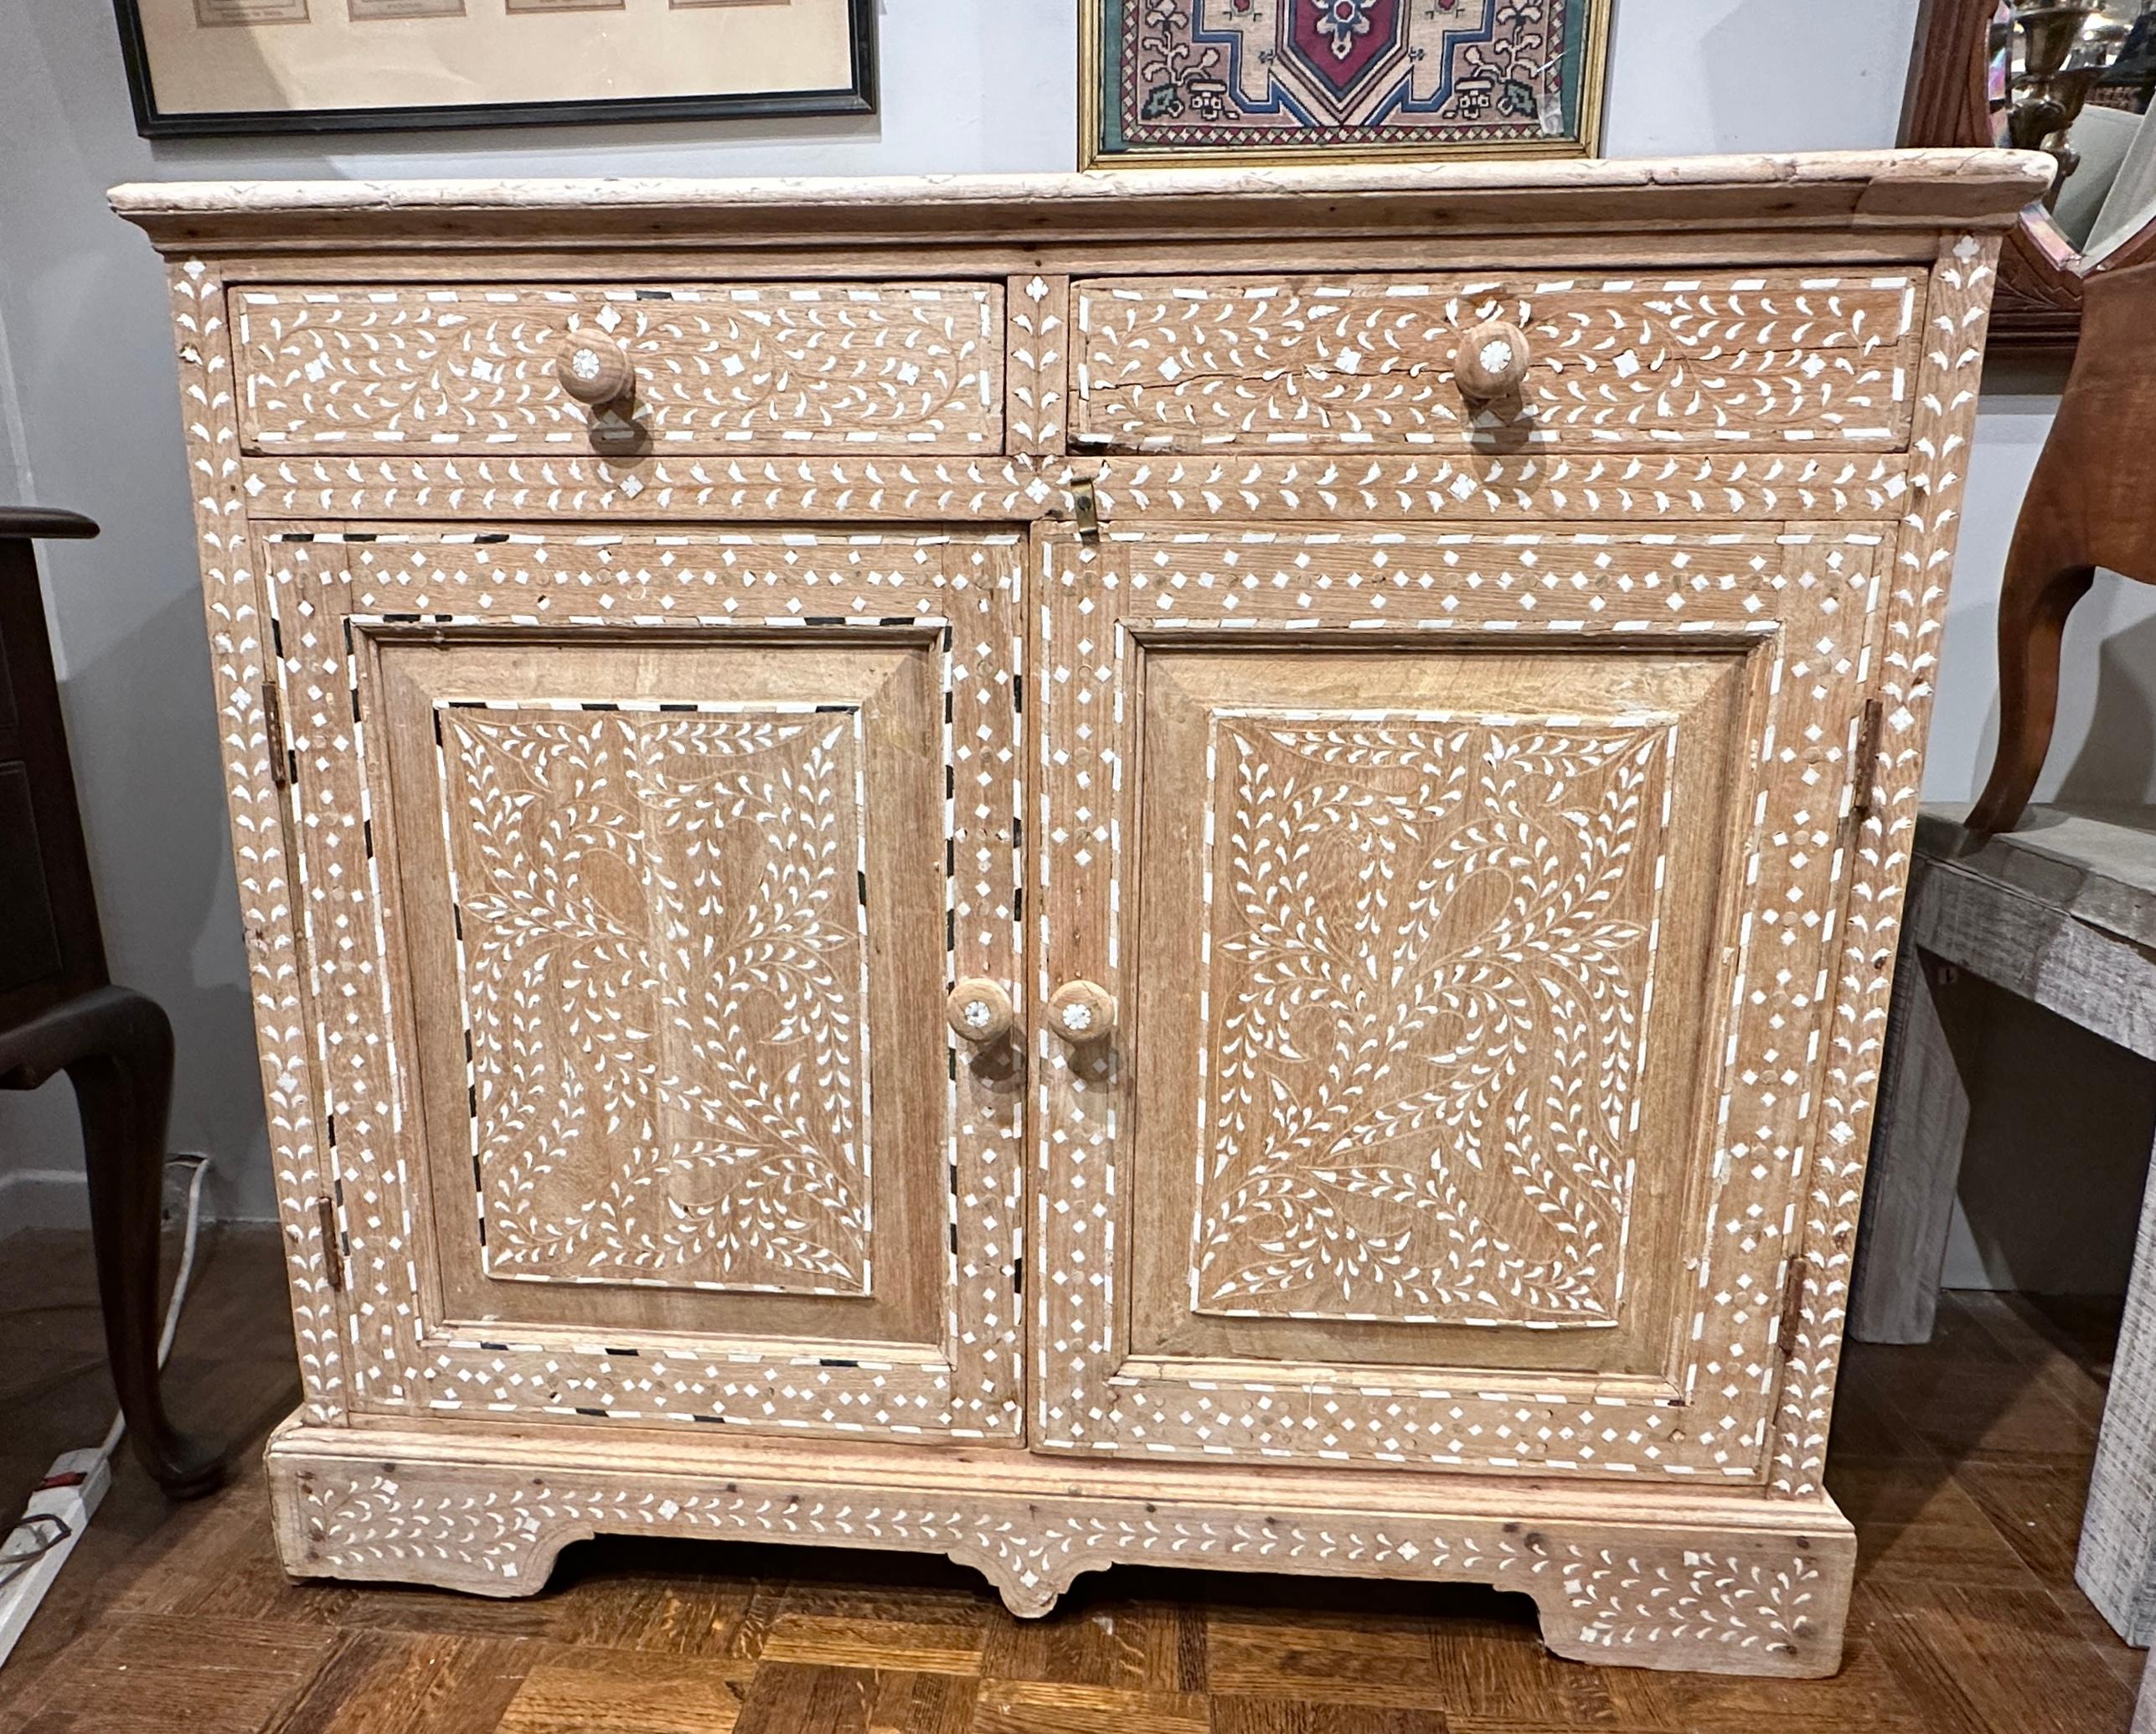 Circa late 19th Century, Moroccan bone inlay cabinet with two drawers and storage cabinet below.  It is highly decorative with floral bone inlay design,  The bleached teak wood gives a very rustic appearance.